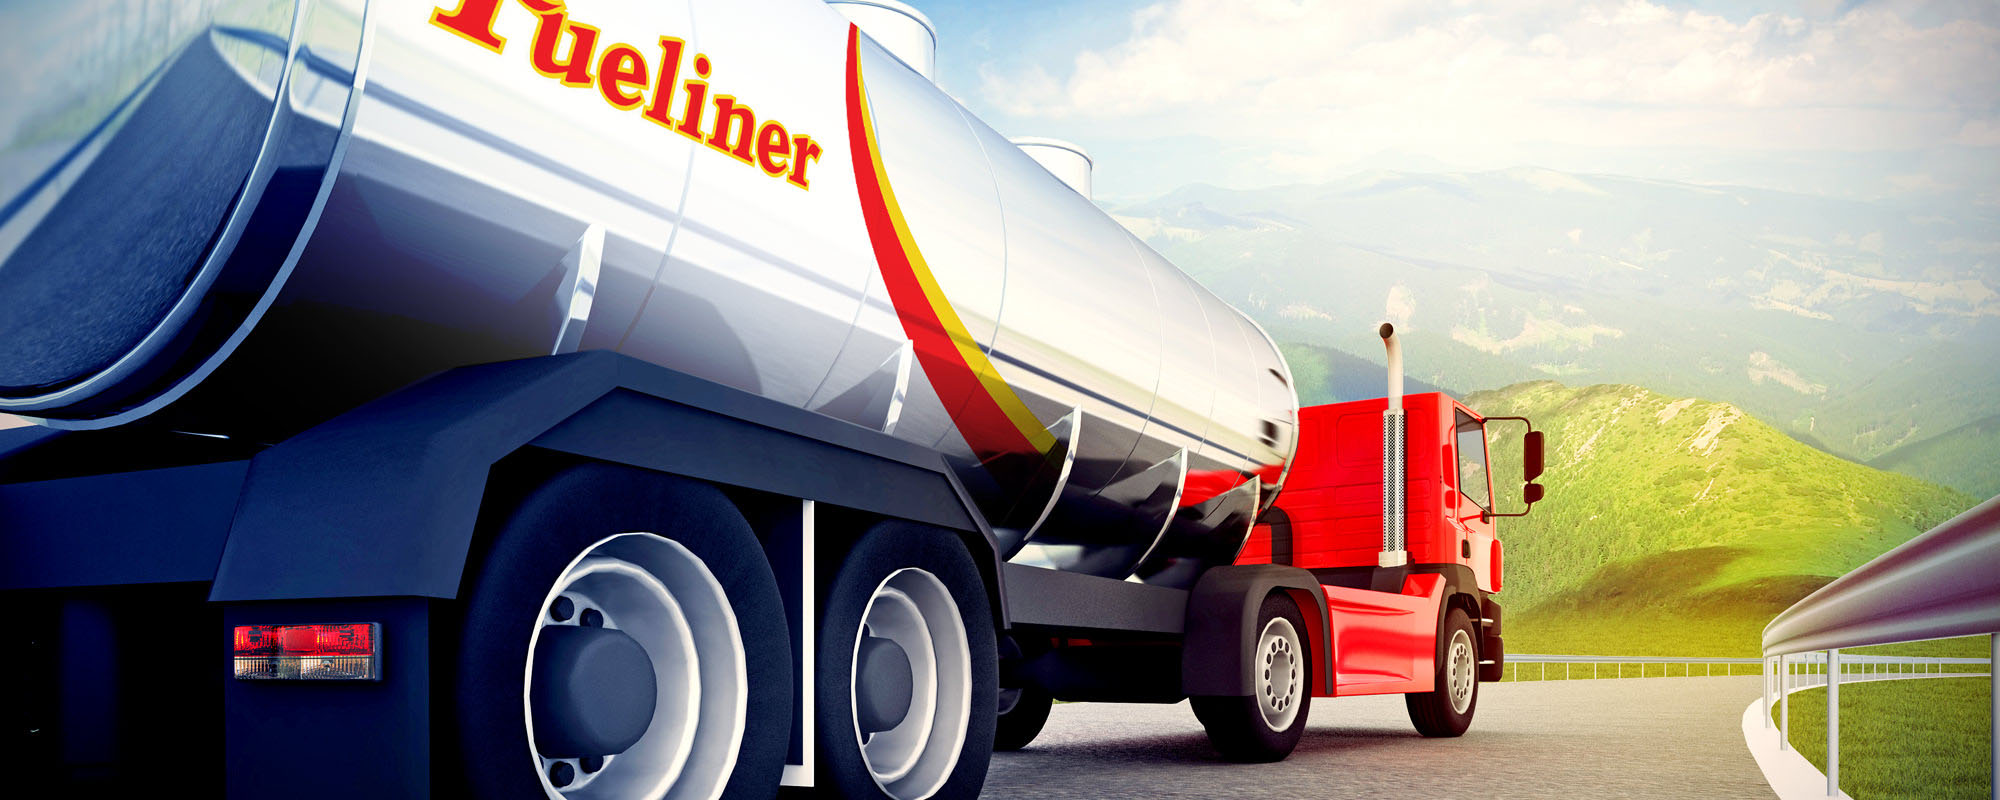 White and red Fueliner Truck driving